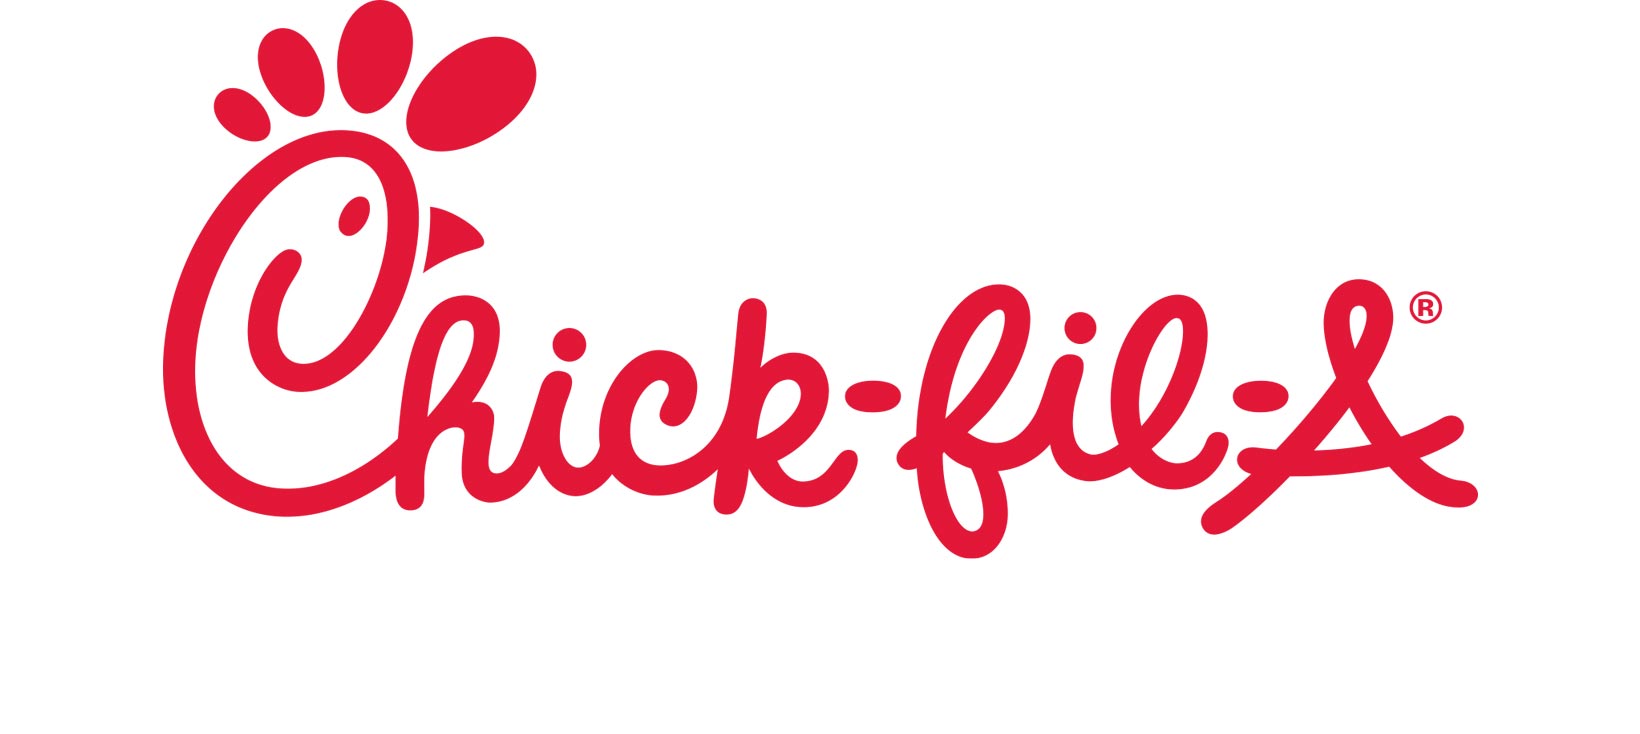 Select SoCal Residents Only: Chick-fil-A App: Free Original Chicken Sandwich (Claim Reward by 10:30AM, Then Redeem Reward by Wed)